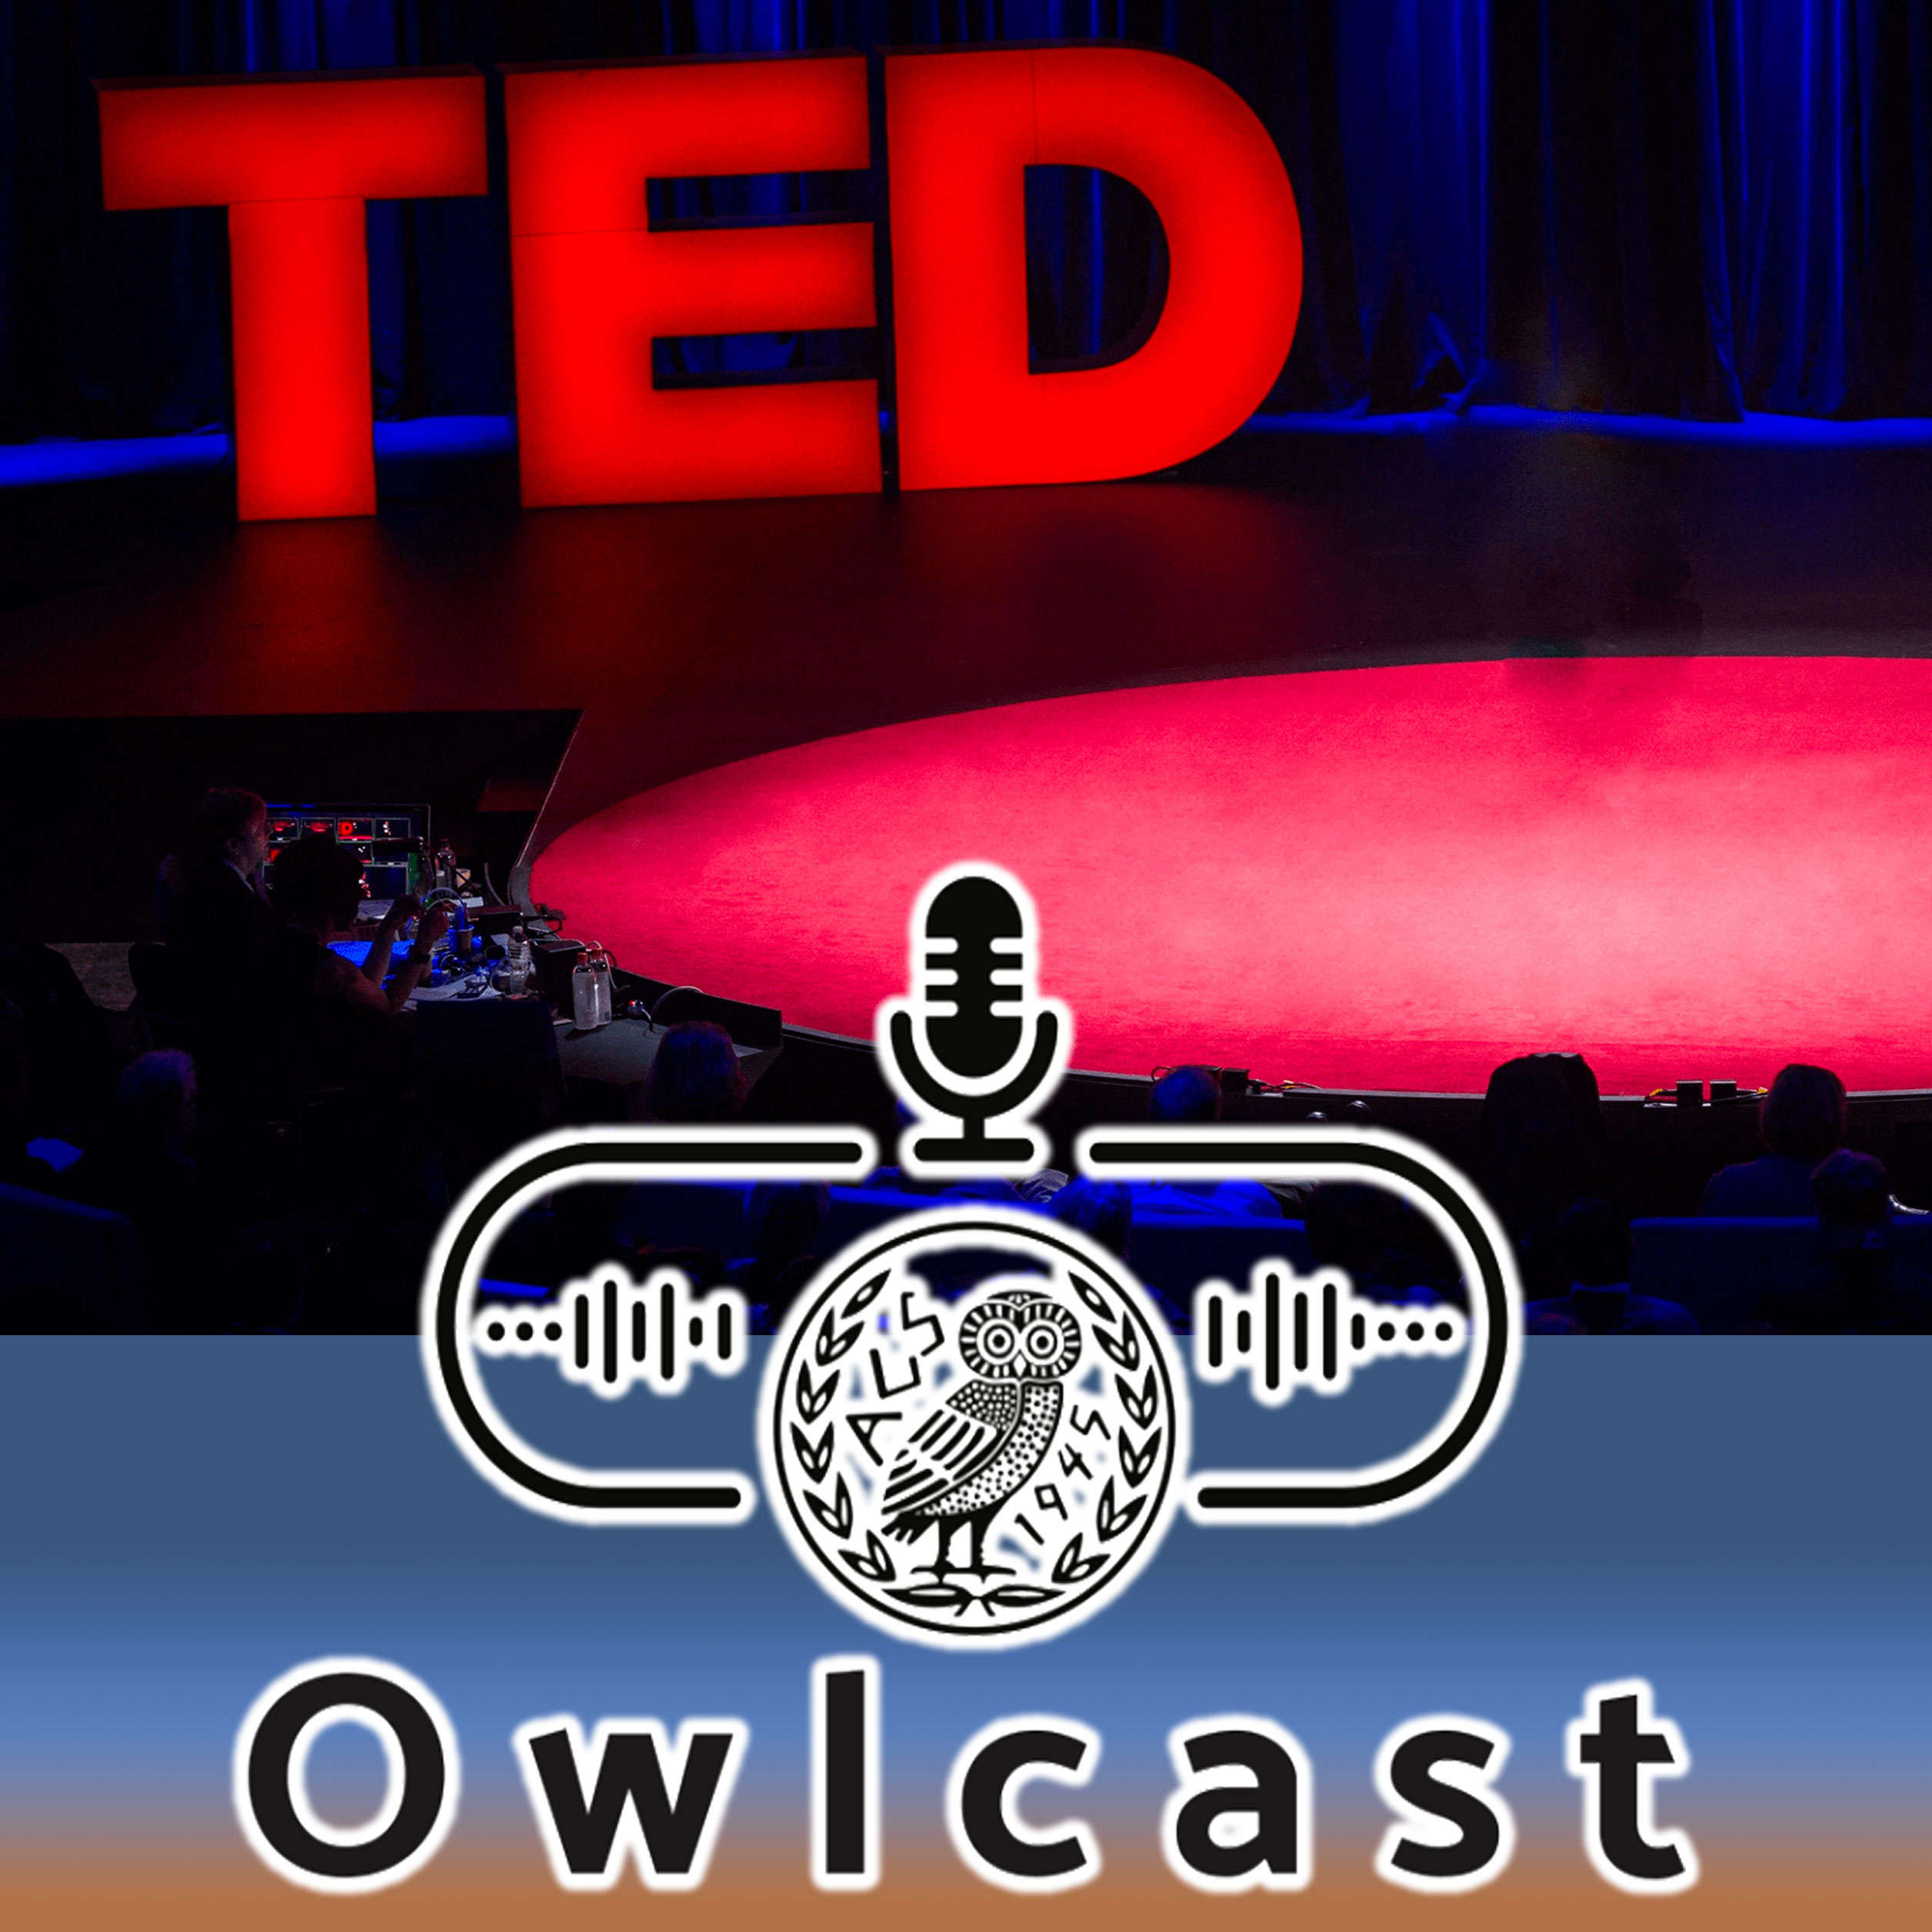 Owlcast 93 - The TED Club of Dering School from Leuven, Belgium